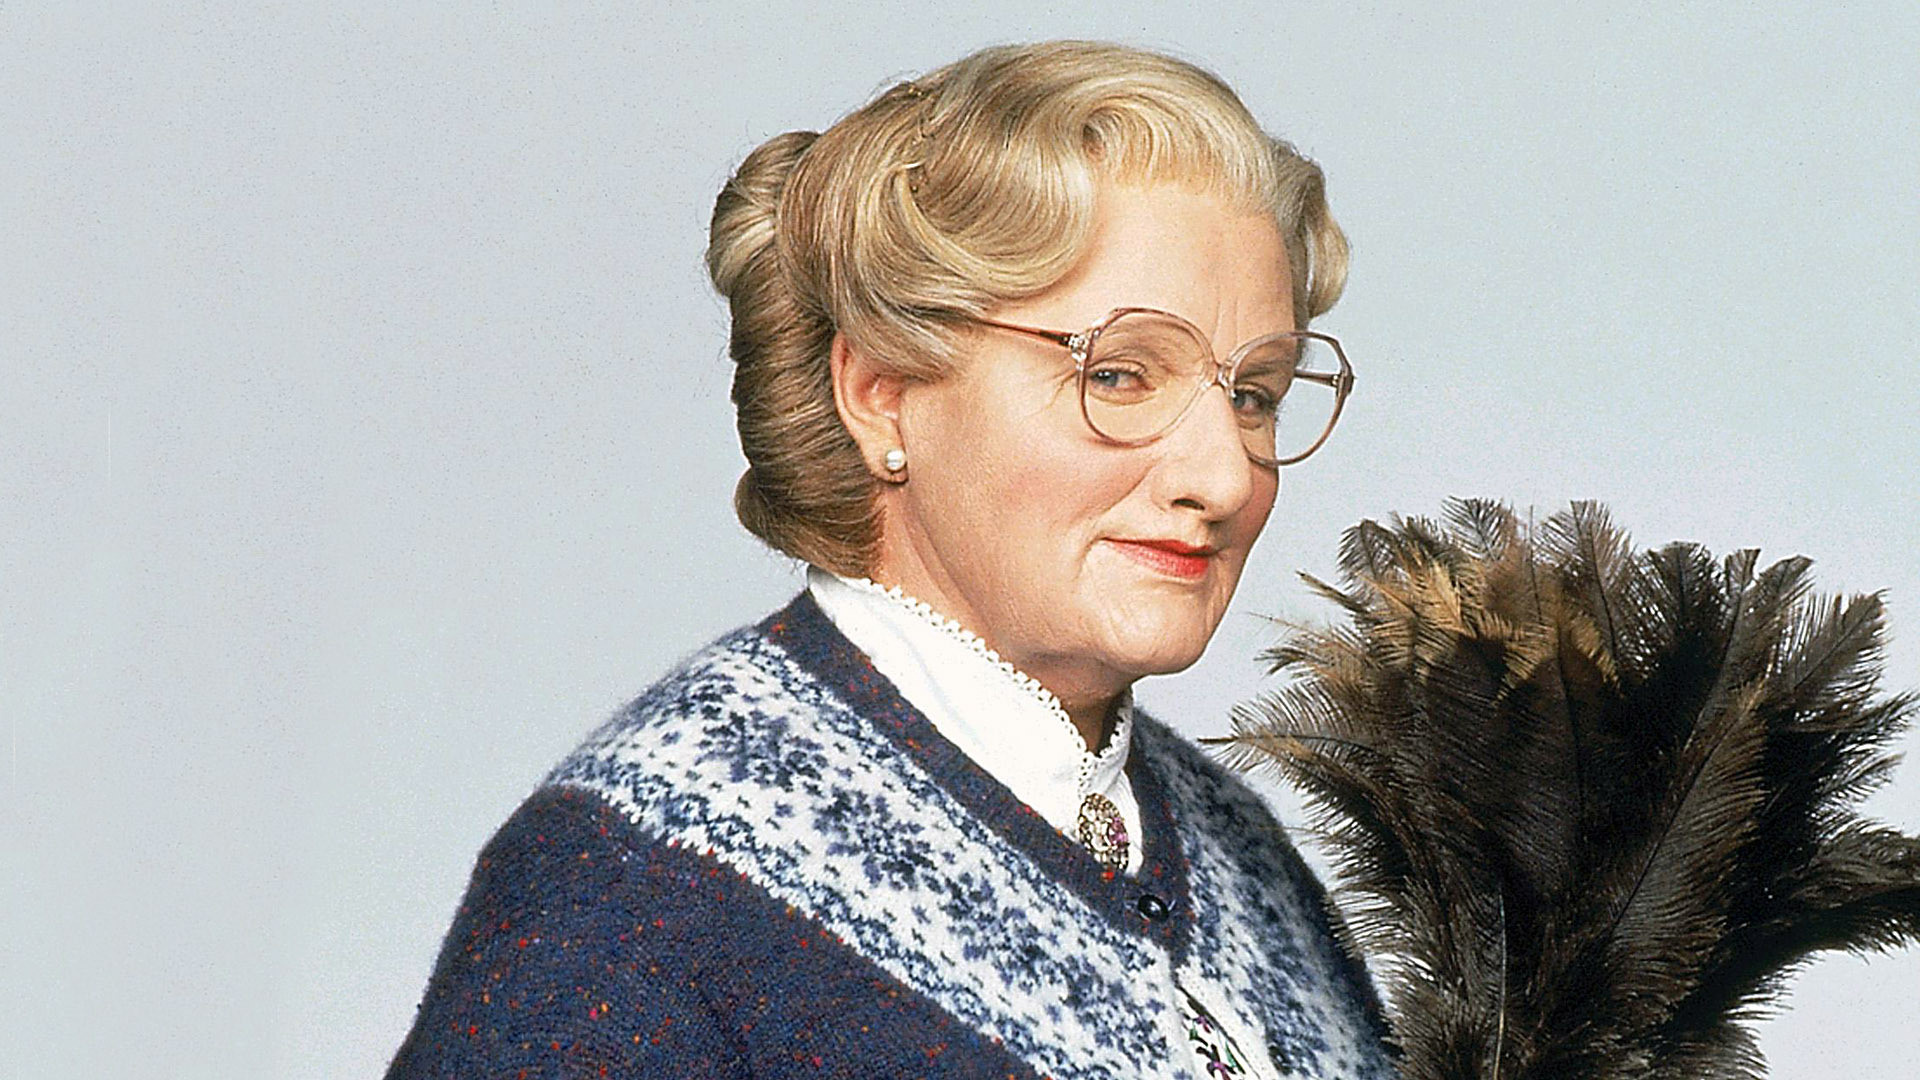 Mrs. Doubtfire, 4K wallpapers, Movie HQ, Pictures 2019, 1920x1080 Full HD Desktop